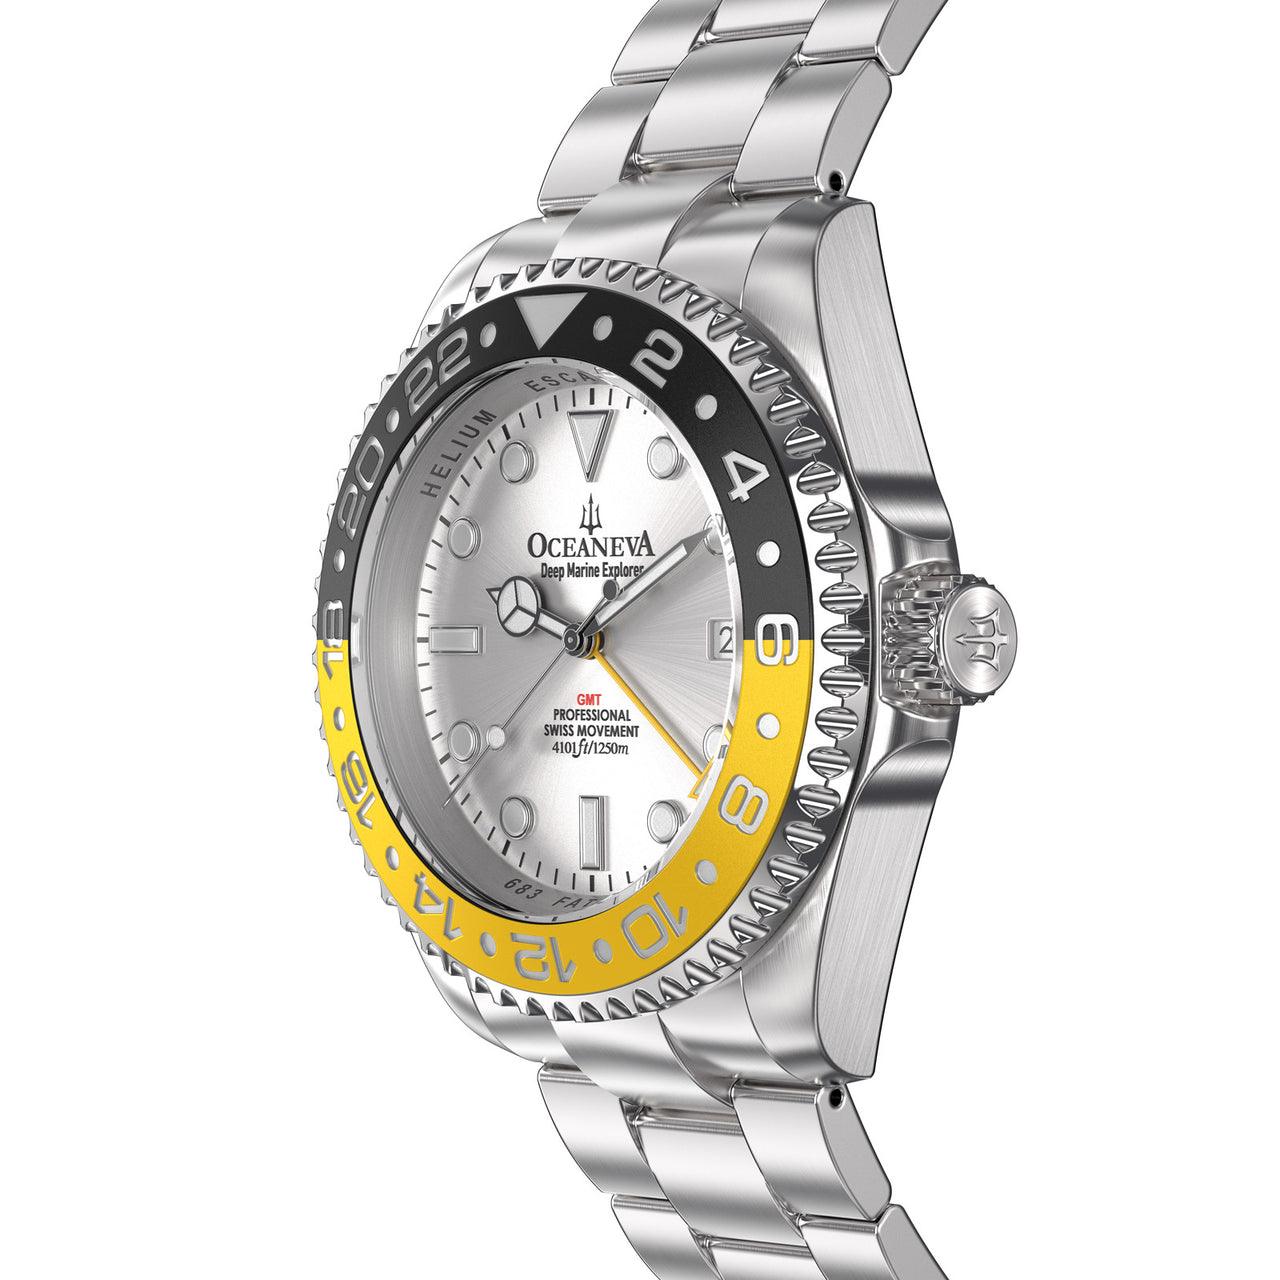 Oceaneva 1250M GMT Dive Watch Silver Black and Yellow Side View Crown